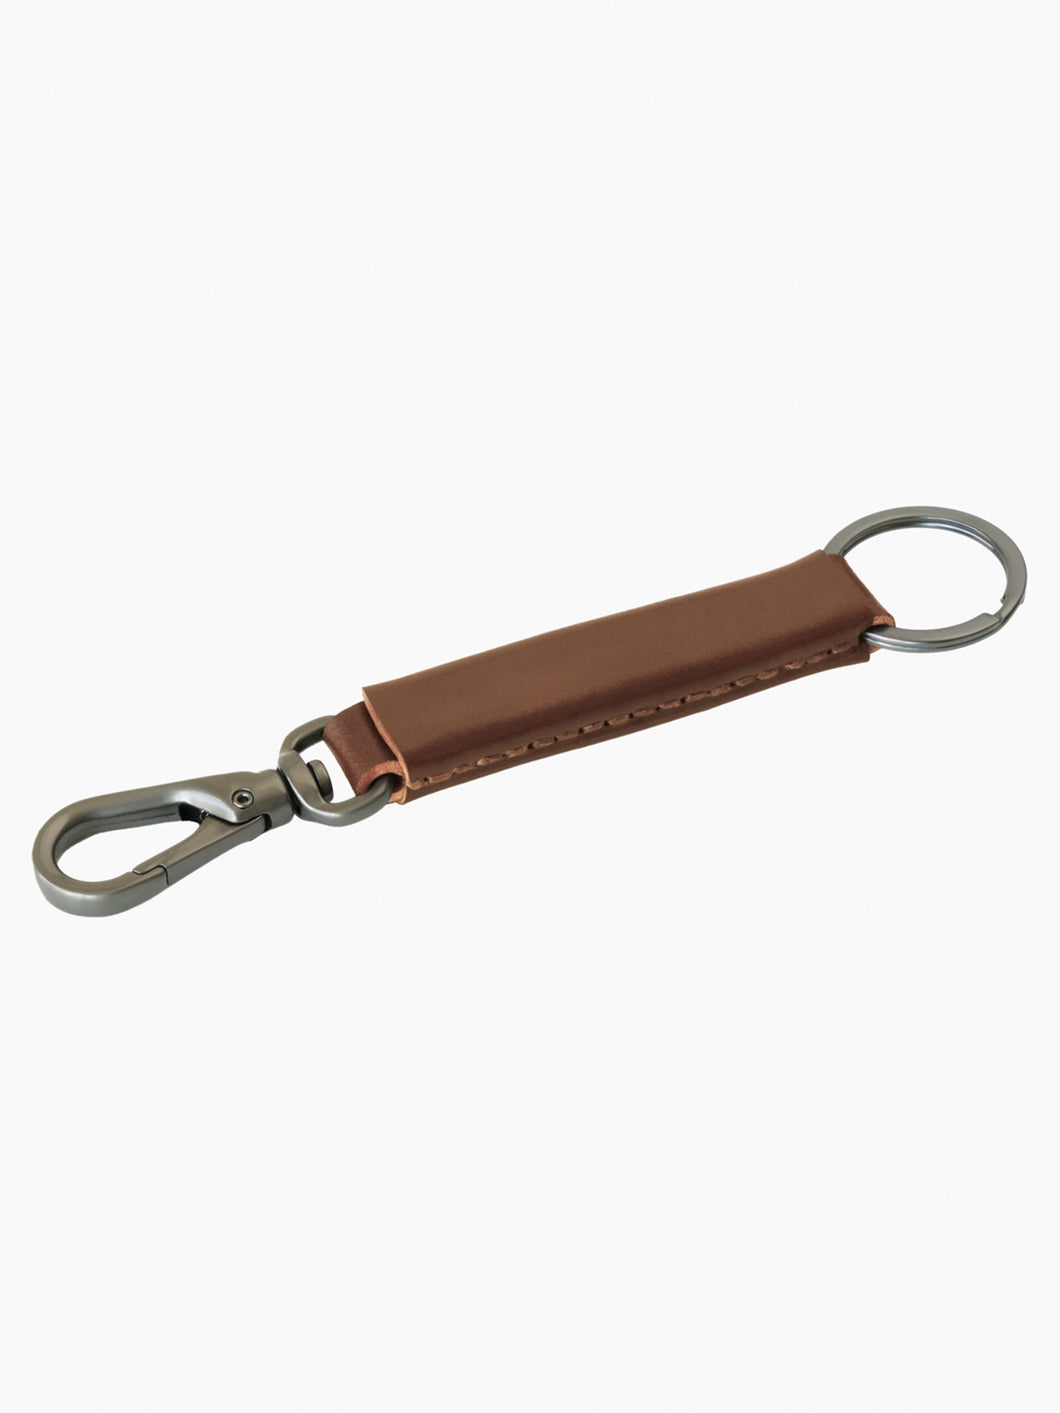 Loop Keychain with Snap Hook - Bourbon Shell Cordovan